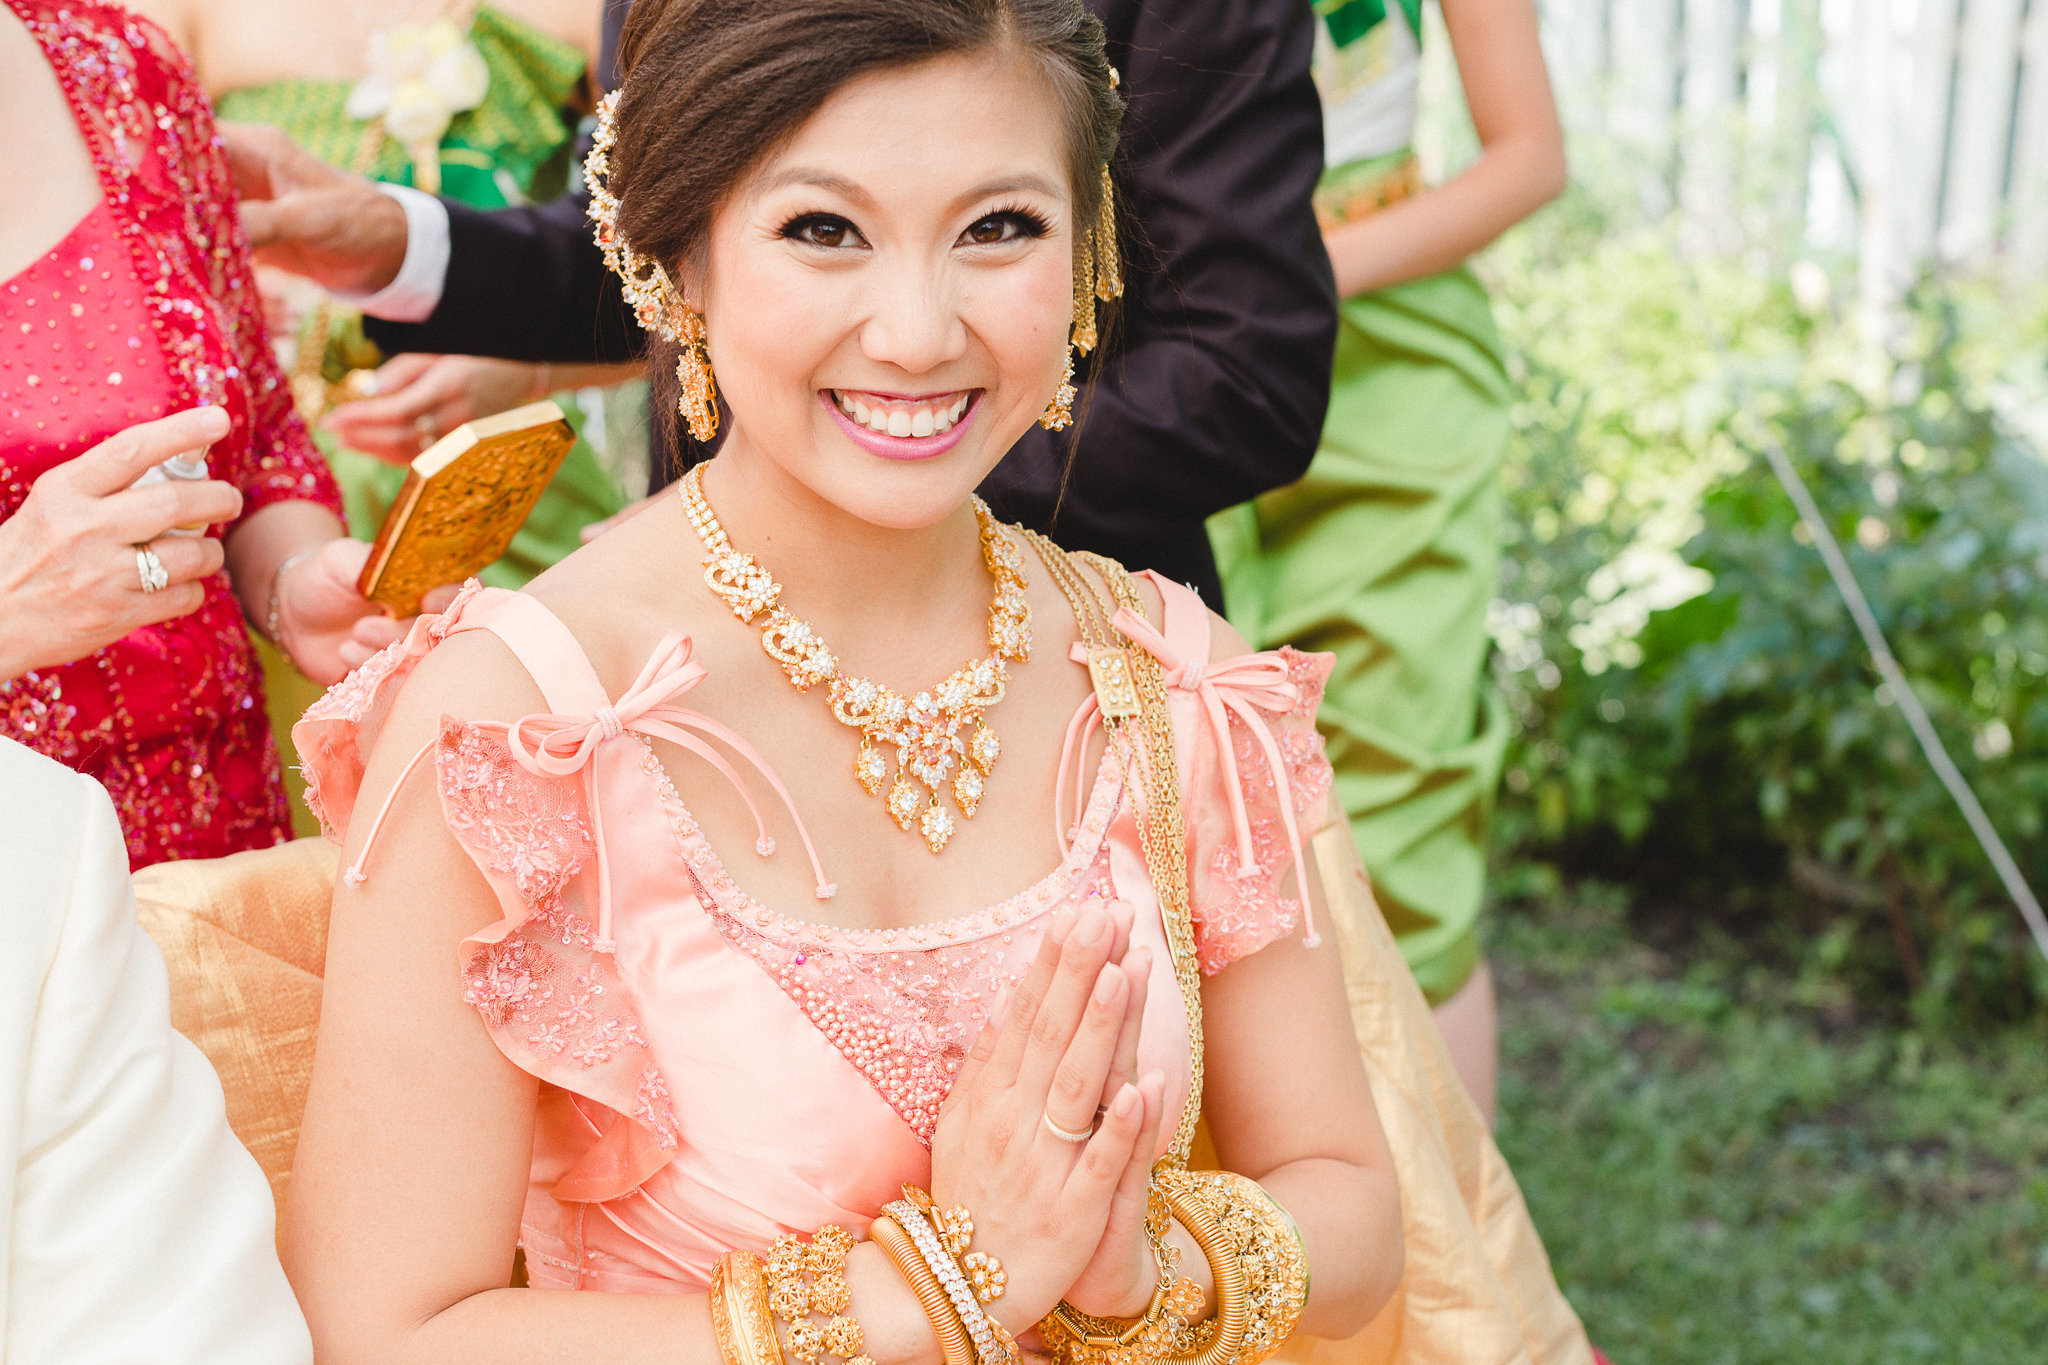 photographe-montreal-mariage-culturel-traditionnel-cambodgien-lisa-renault-photographie-traditional-cultural-cambodian-wedding-44